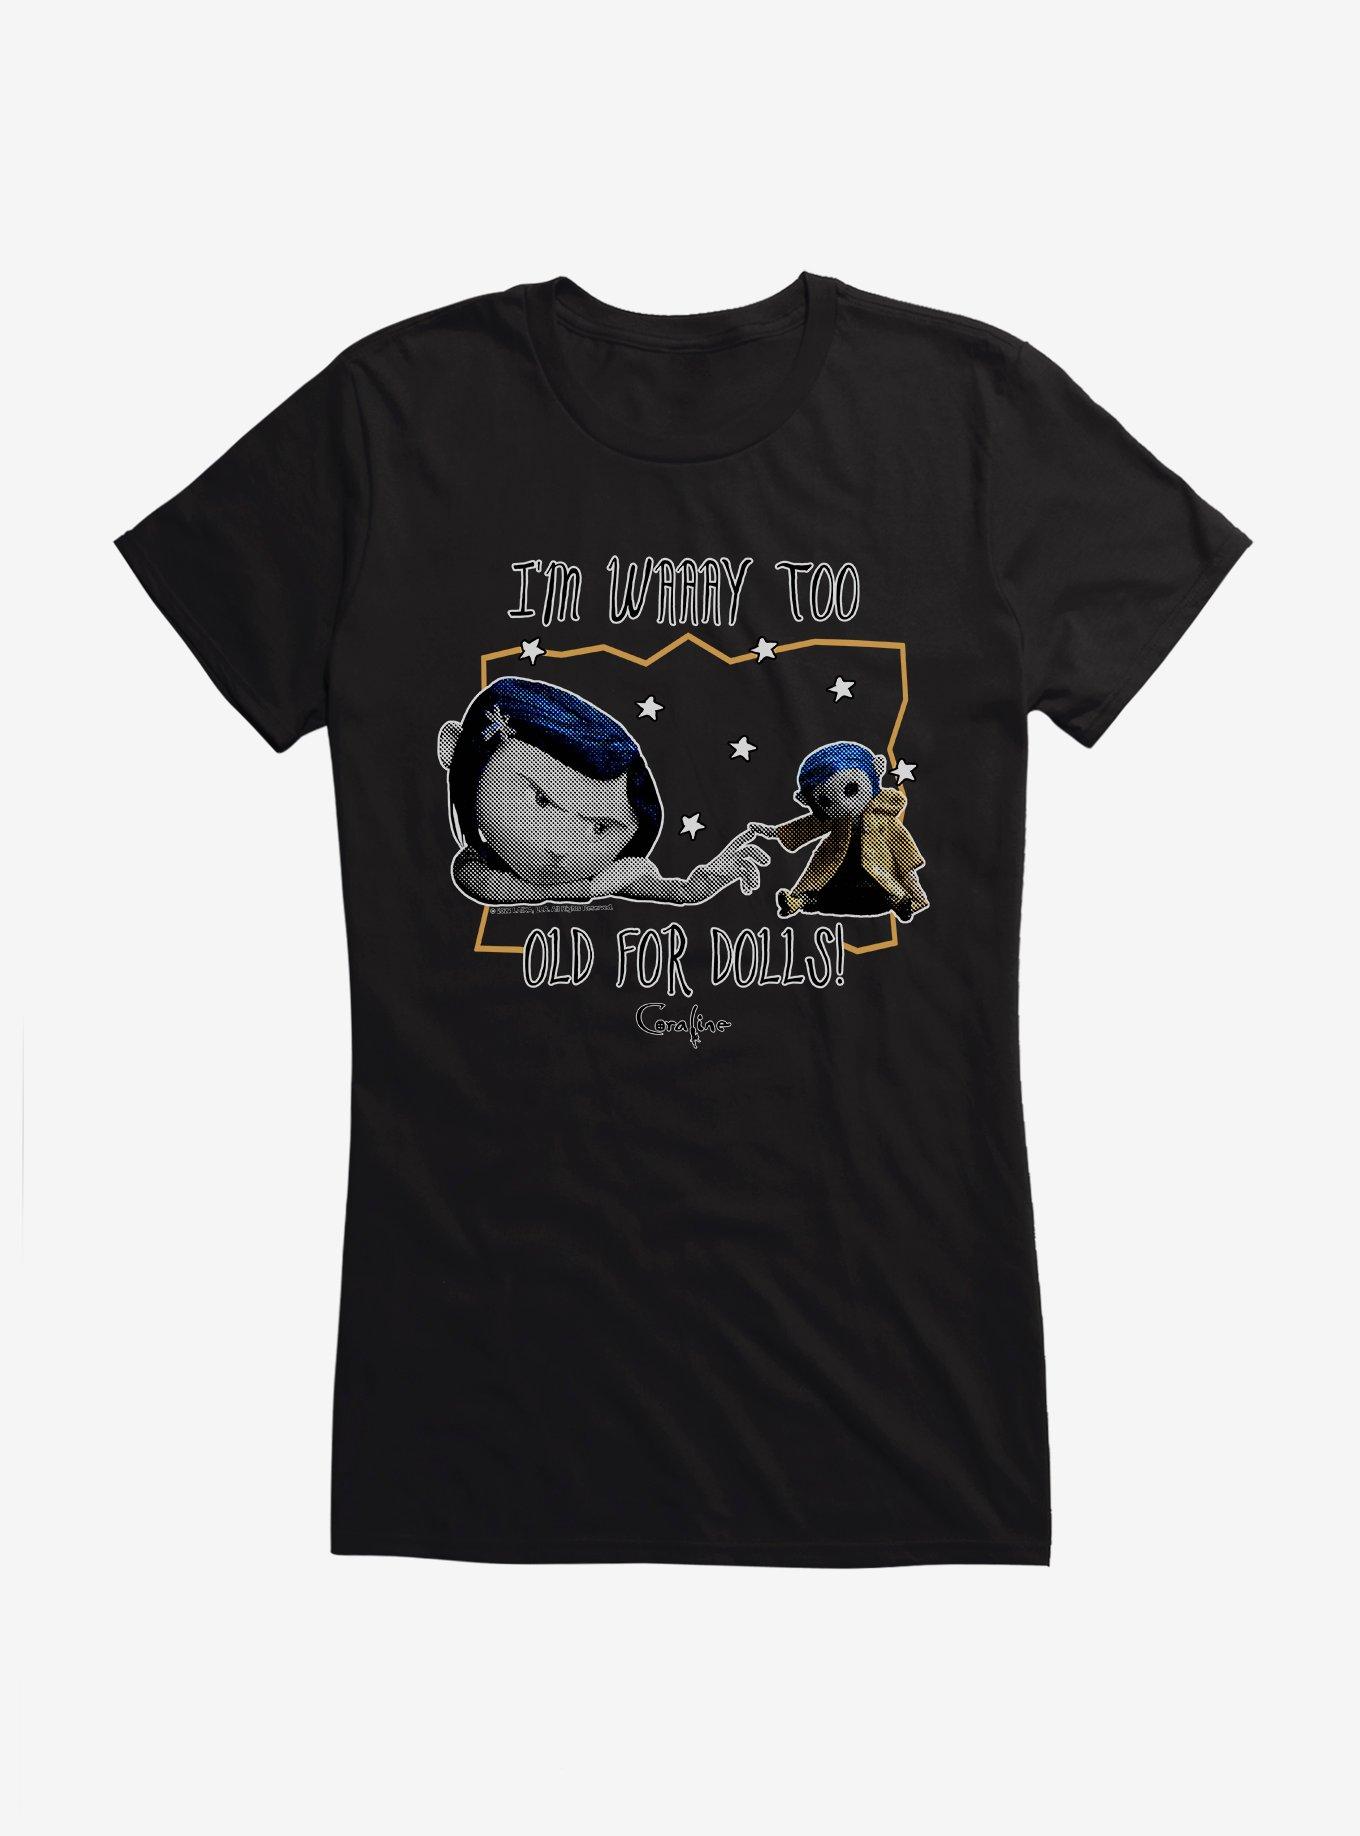 Coraline Too Old for Dolls Girls T-Shirt